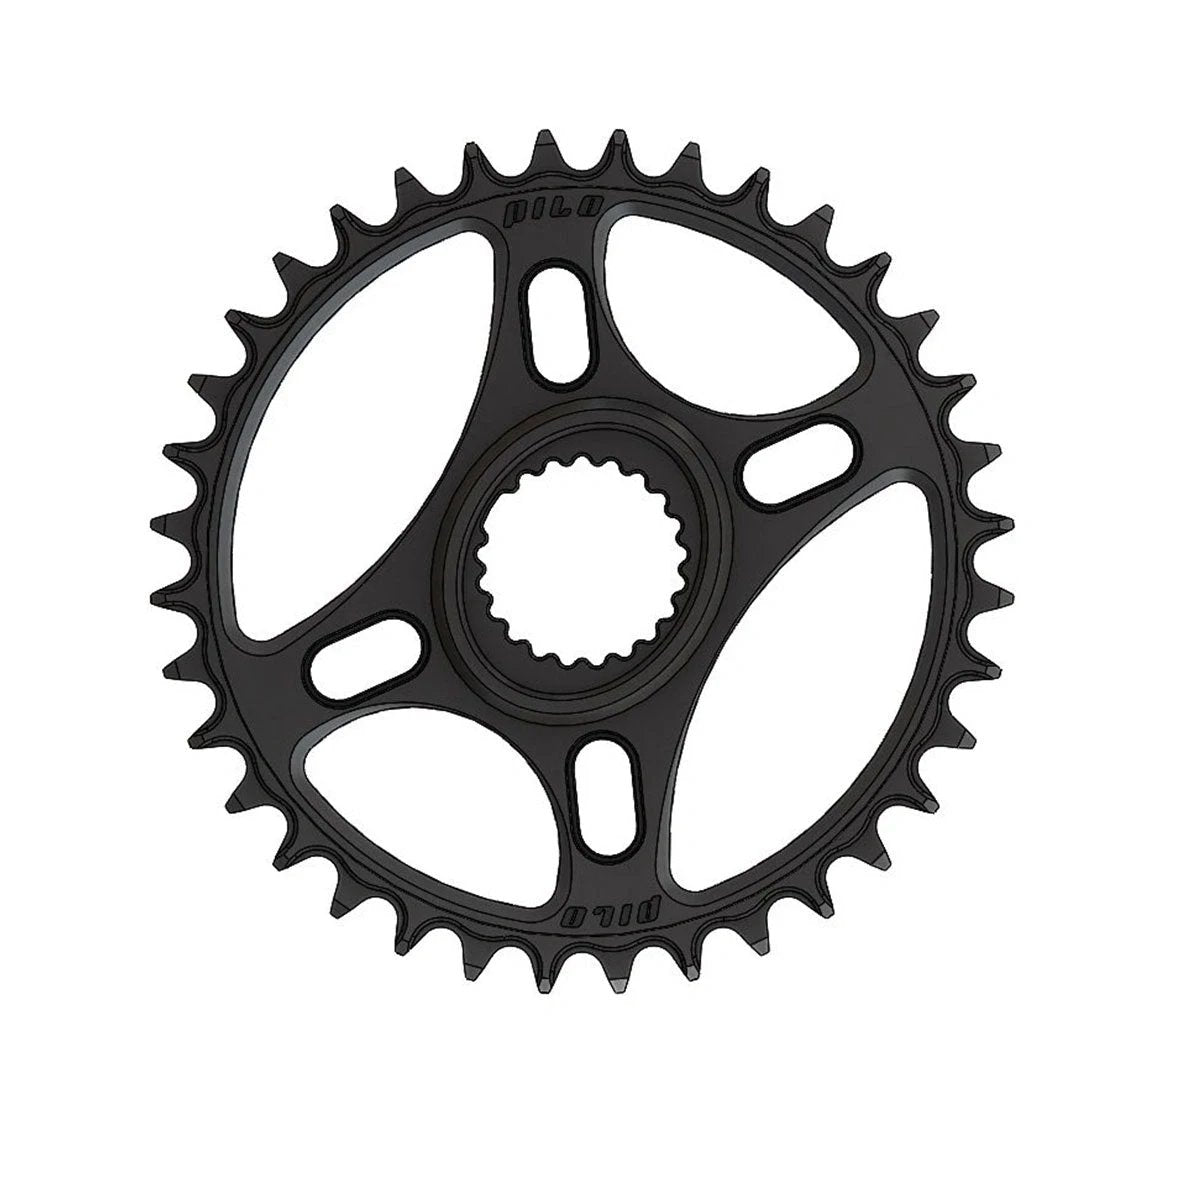 Pilo 36T Chainring For Shimano Cranks - Replacement Chain Ring